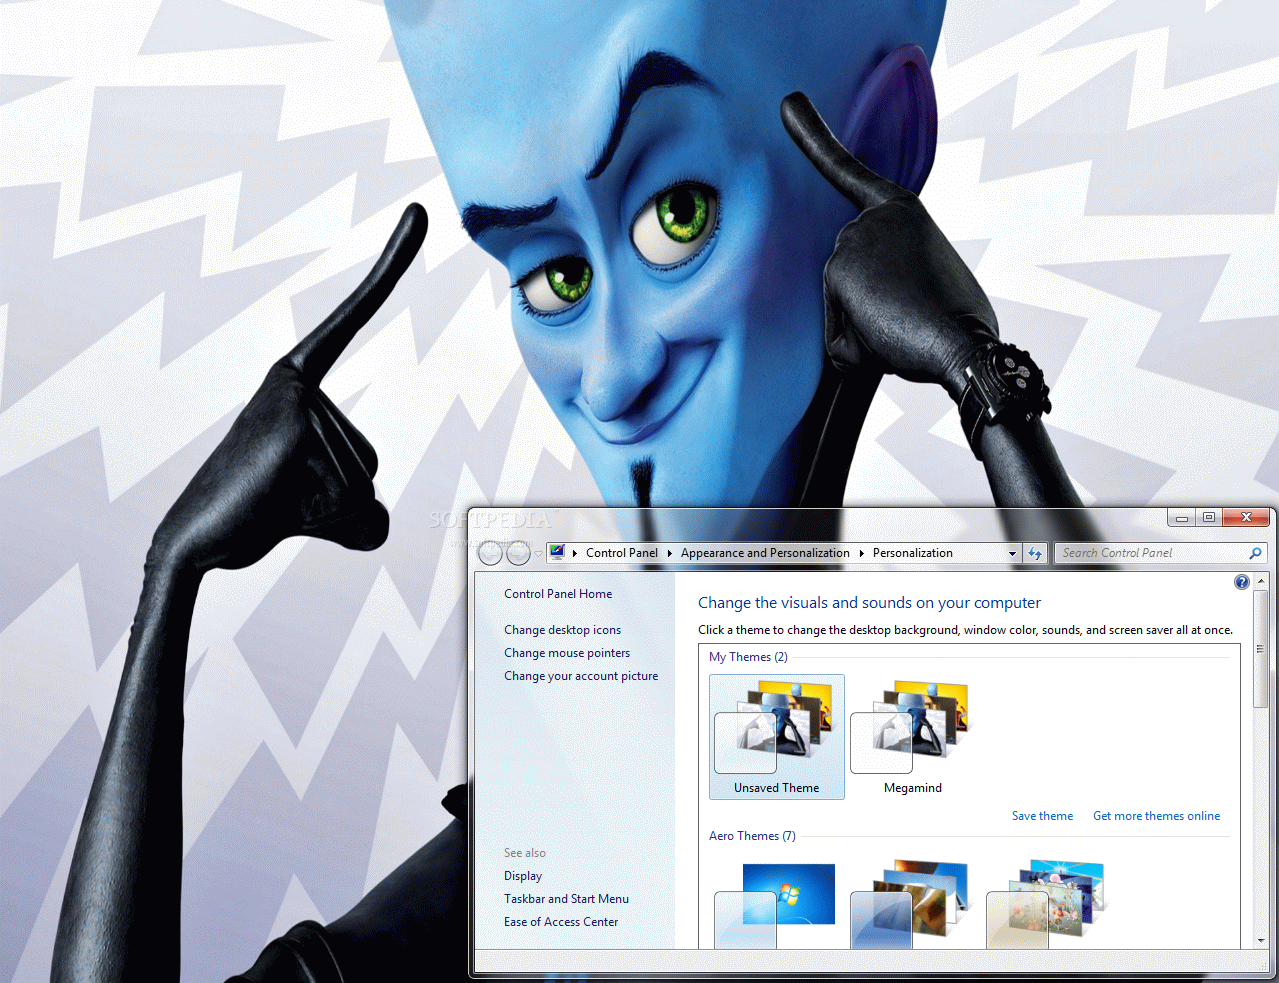 Megamind Windows 7 Theme with dialogue